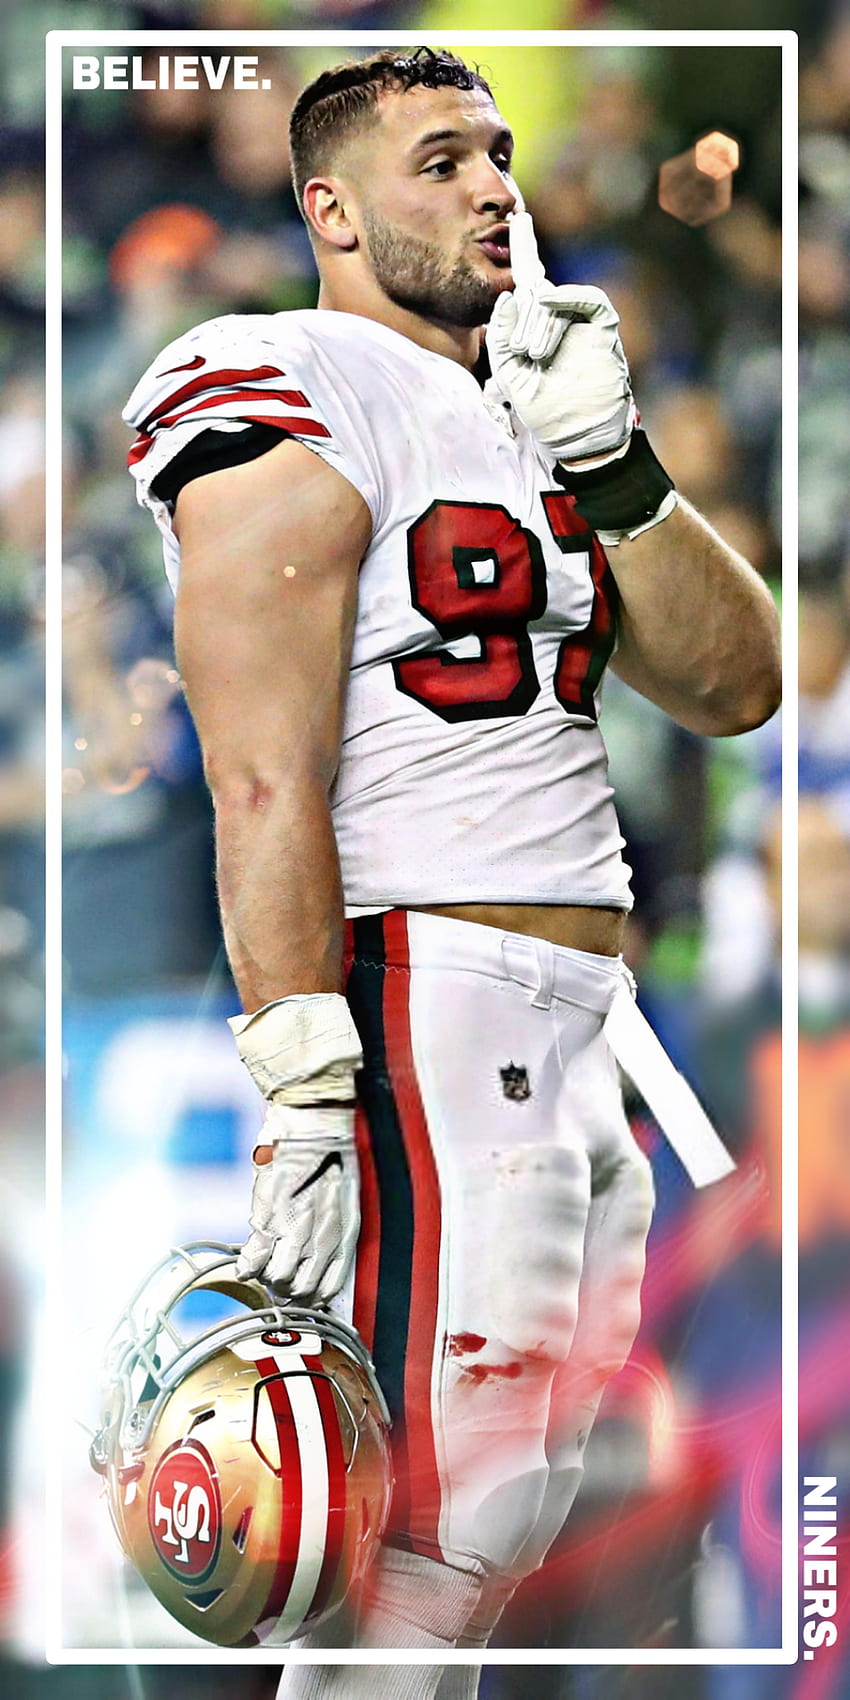 Nick Bosa 49ers wallpaper by thynx  Download on ZEDGE  d69c